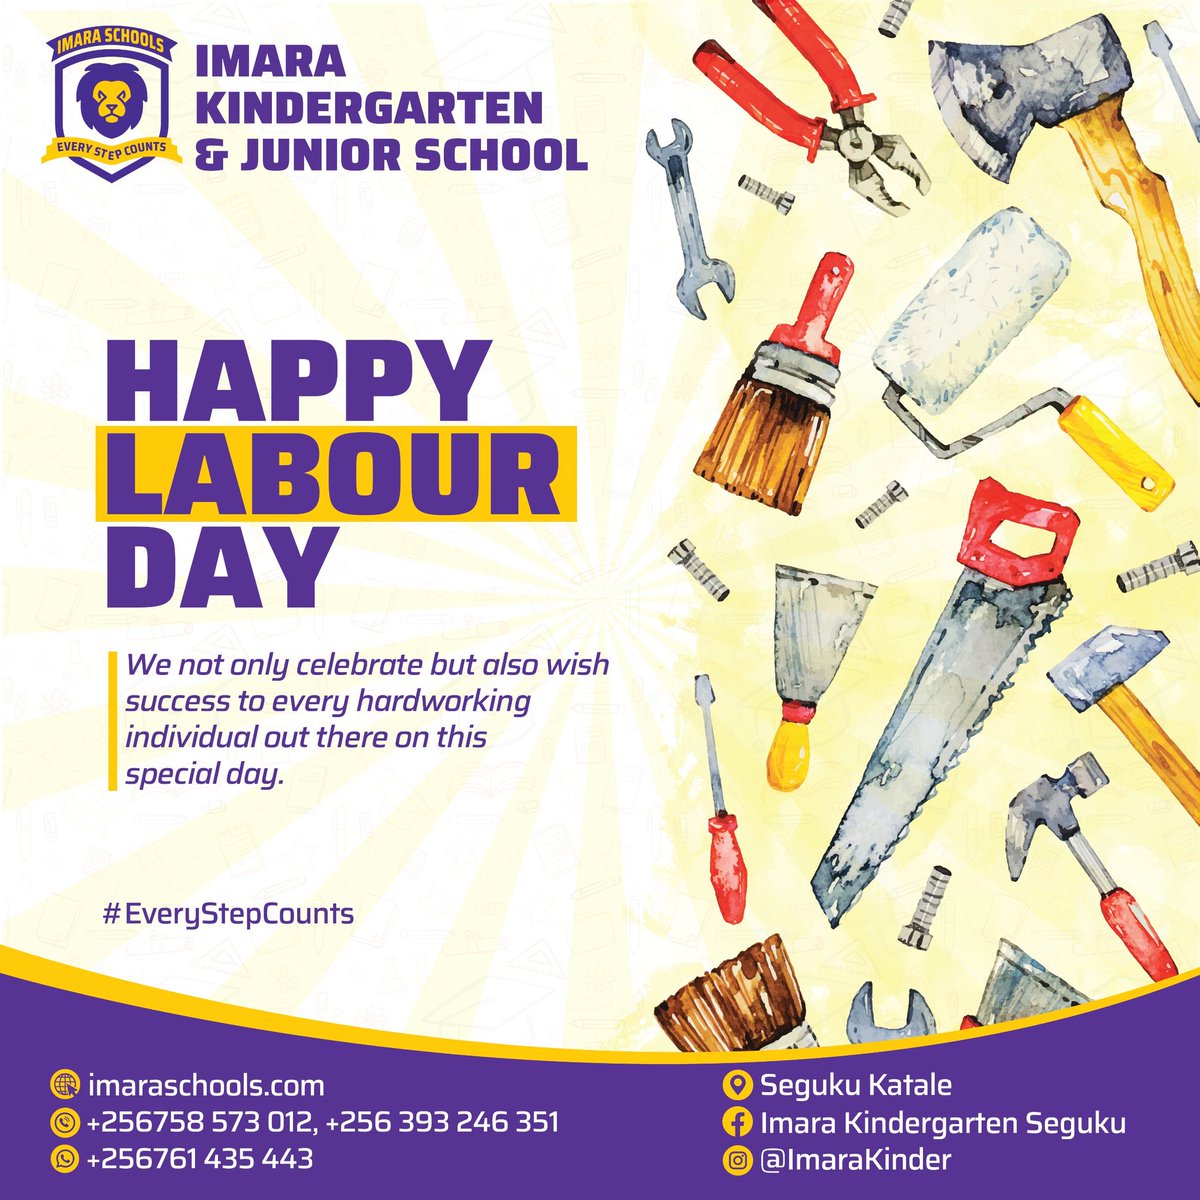 Happy Labour Day. May God continue to bless the works of your hands.

#EveryStepCounts 
#ImaraKindergartenAndJuniorSchool